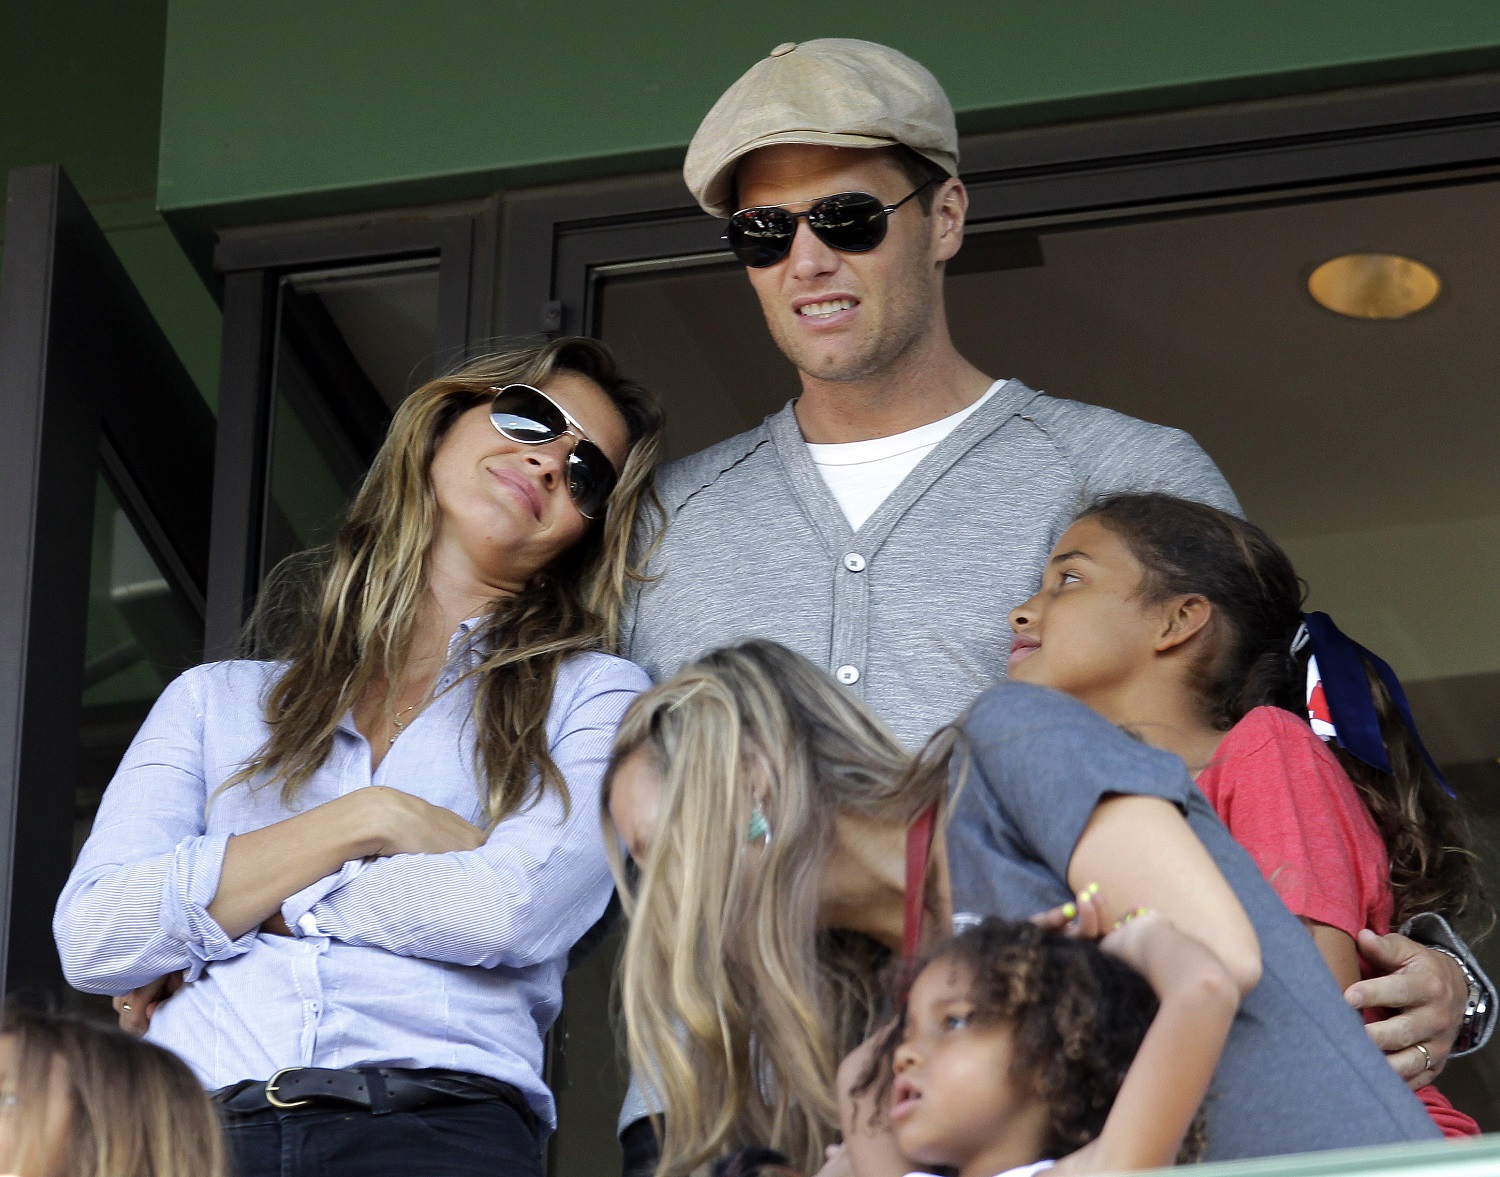 New England Patriots quarterback Tom Brady and his wife, Giselle, left, stand in a box during a baseball game between the Boston Red Sox and the New York Yankees at Fenway Park in Boston, Friday, April 20, 2012. (AP Photo/Elise Amendola)